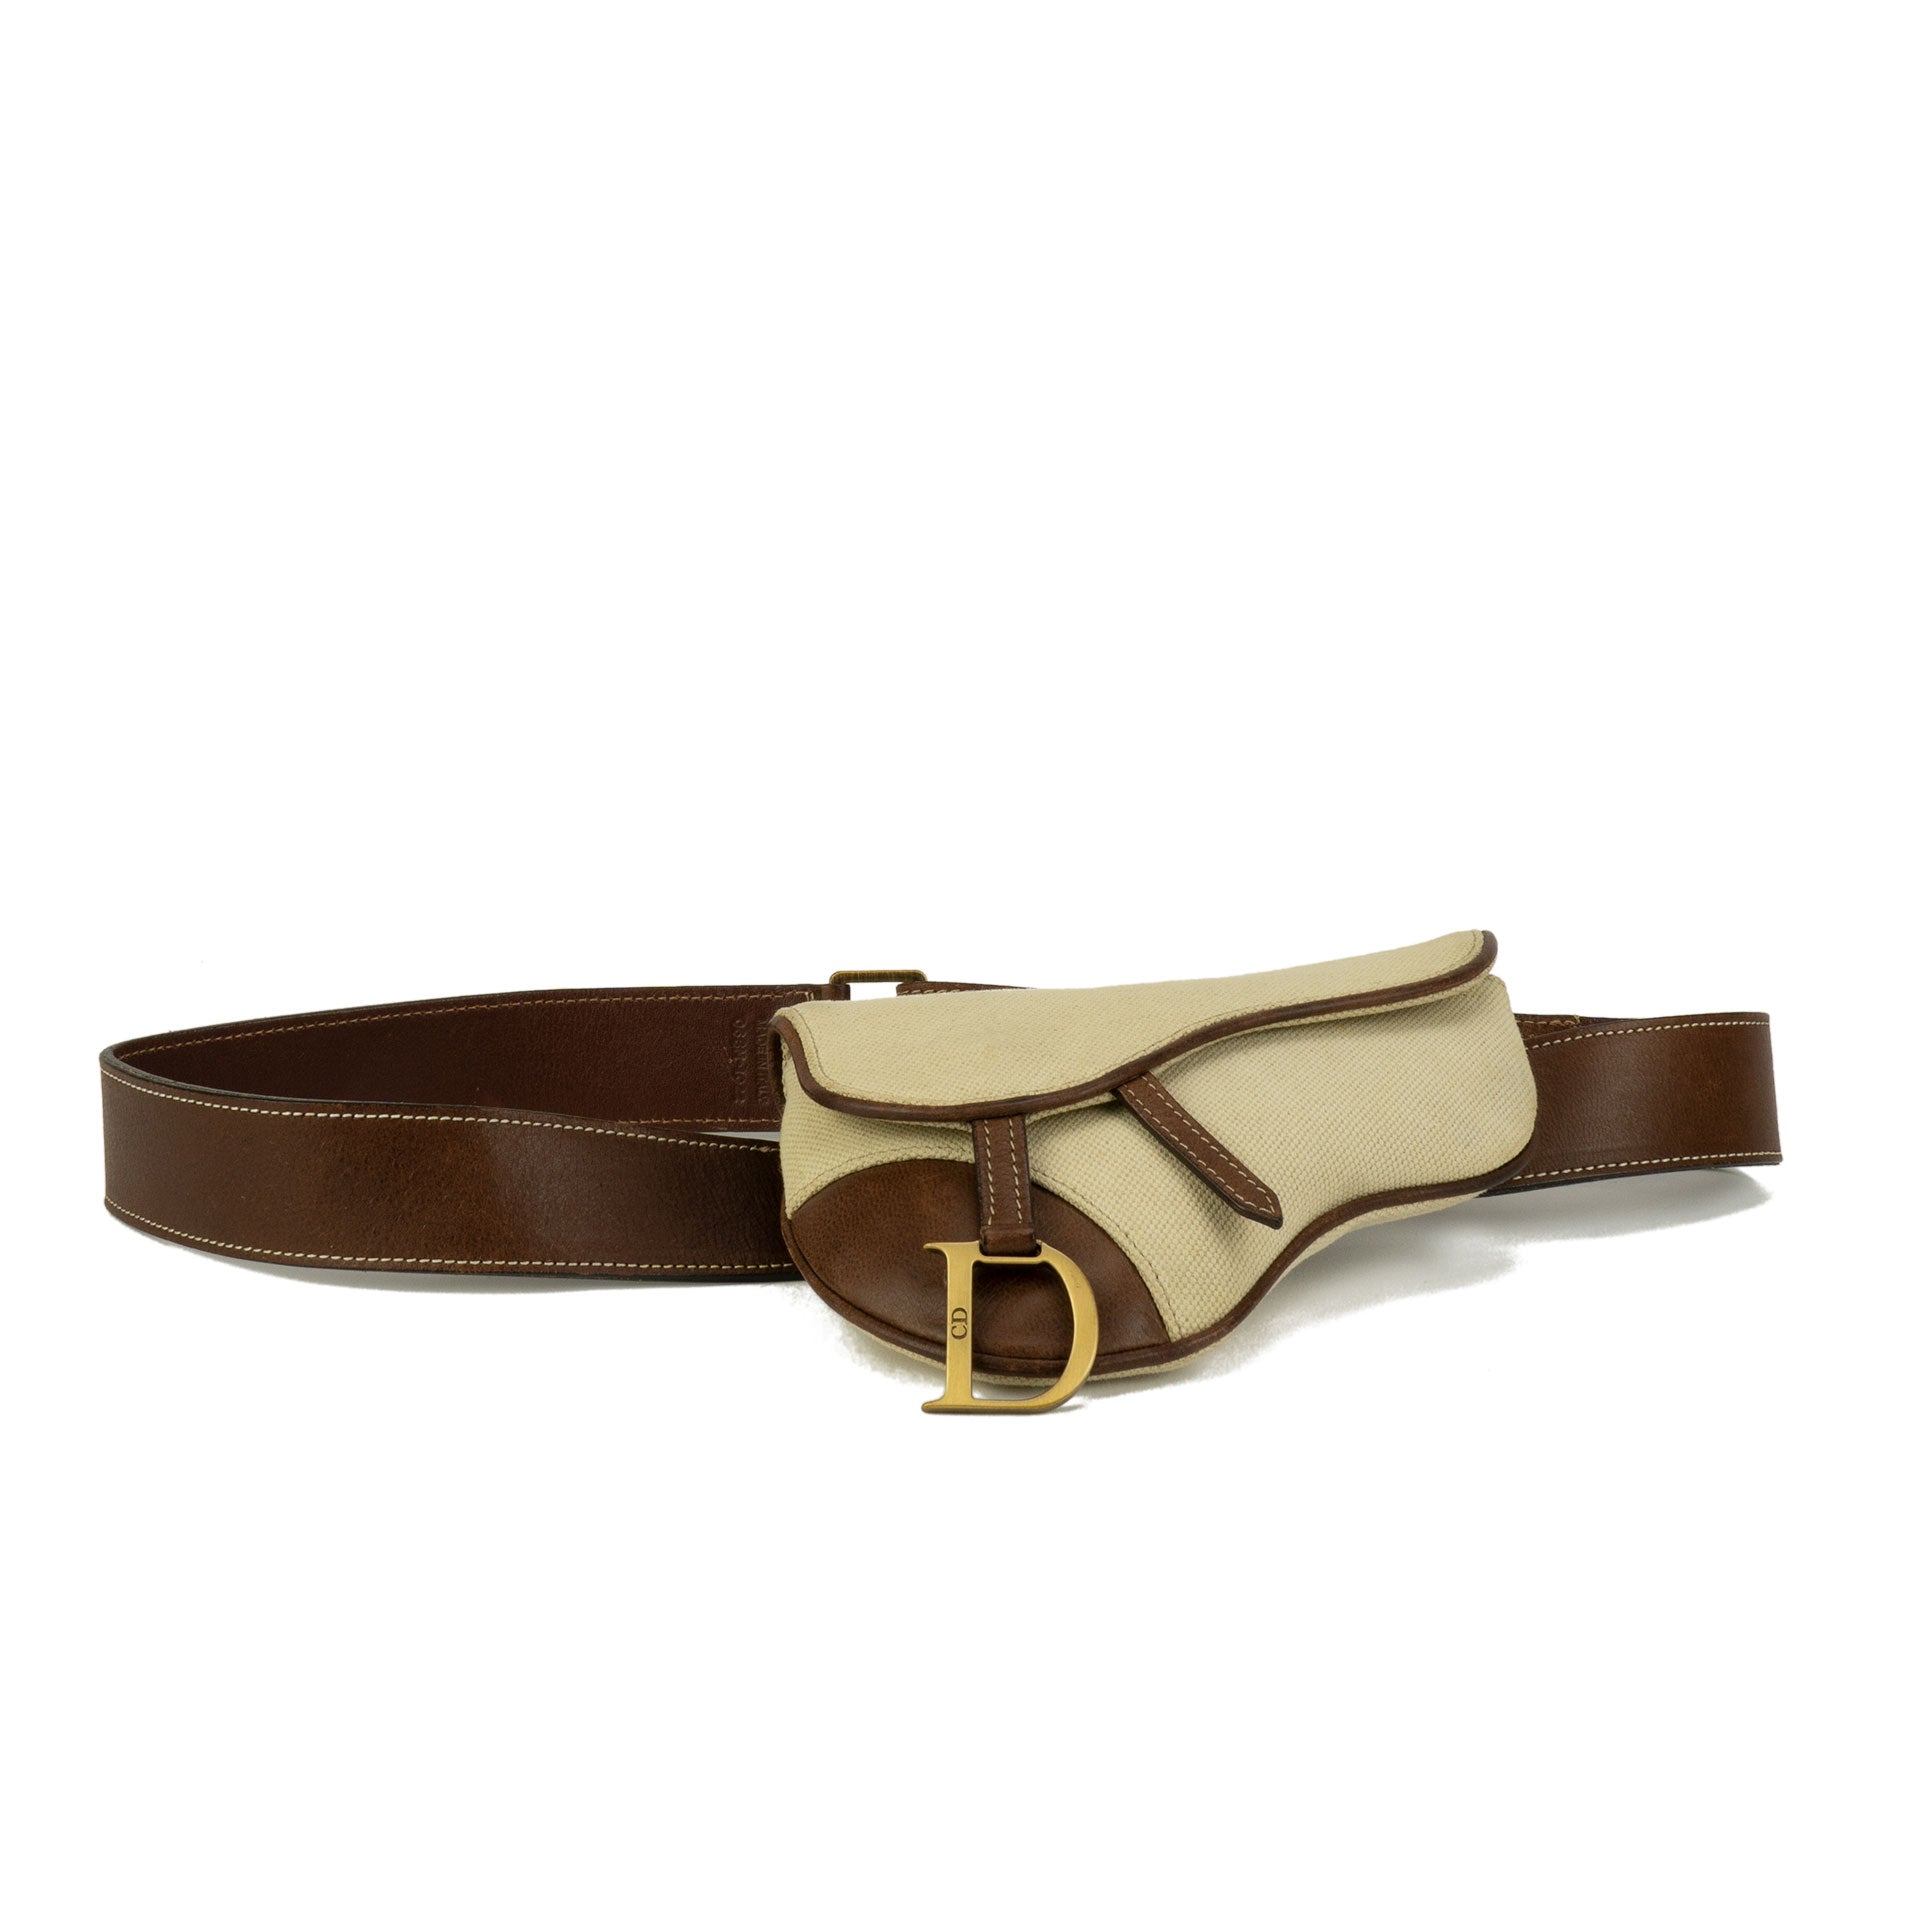 Dior Brown Ultra Matte Saddle Belt Pouch Beige Leather Pony-style